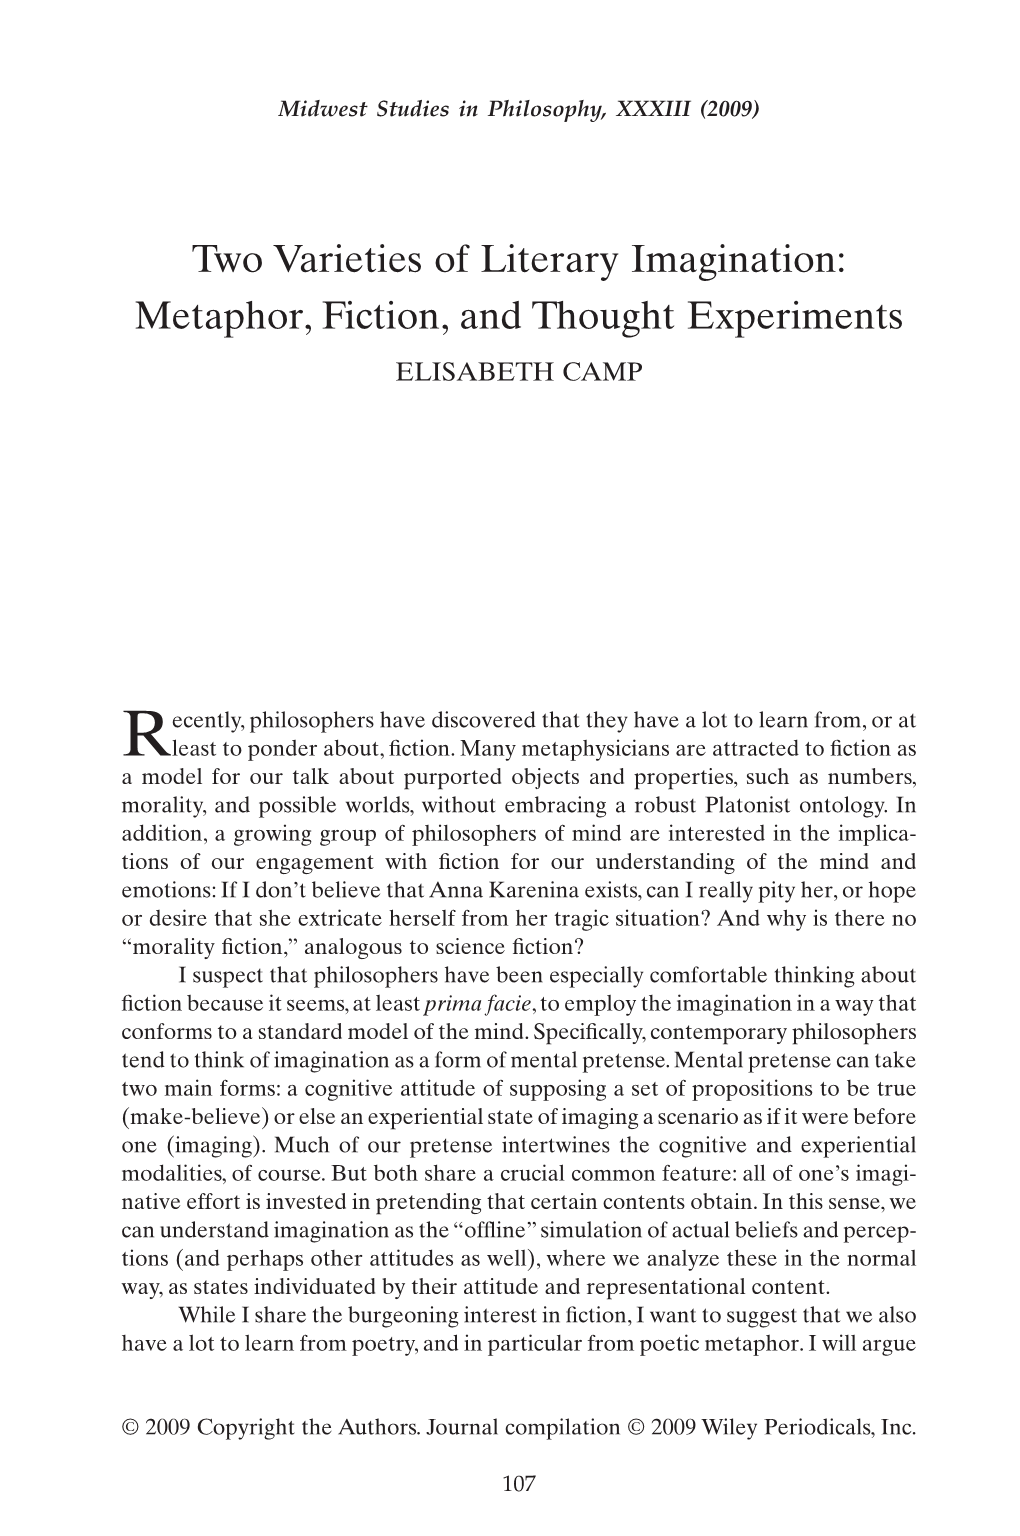 Two Varieties of Literary Imagination: Metaphor, Fiction, and Thought Experiments ELISABETH CAMP